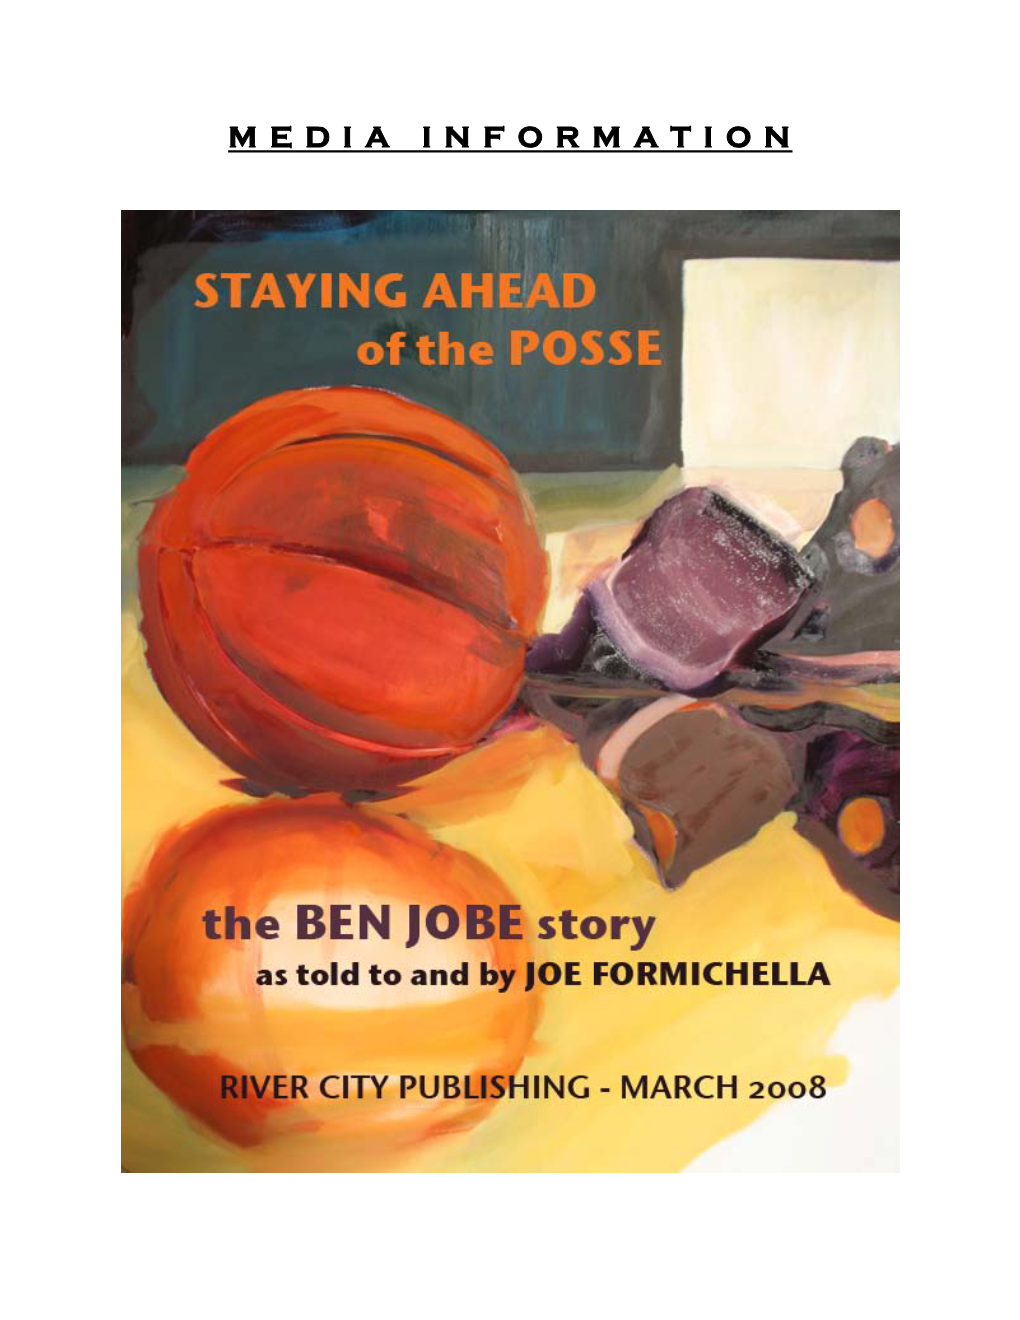 STAYING AHEAD of the POSSE: the BEN JOBE Story As Told to and by JOE FORMICHELLA